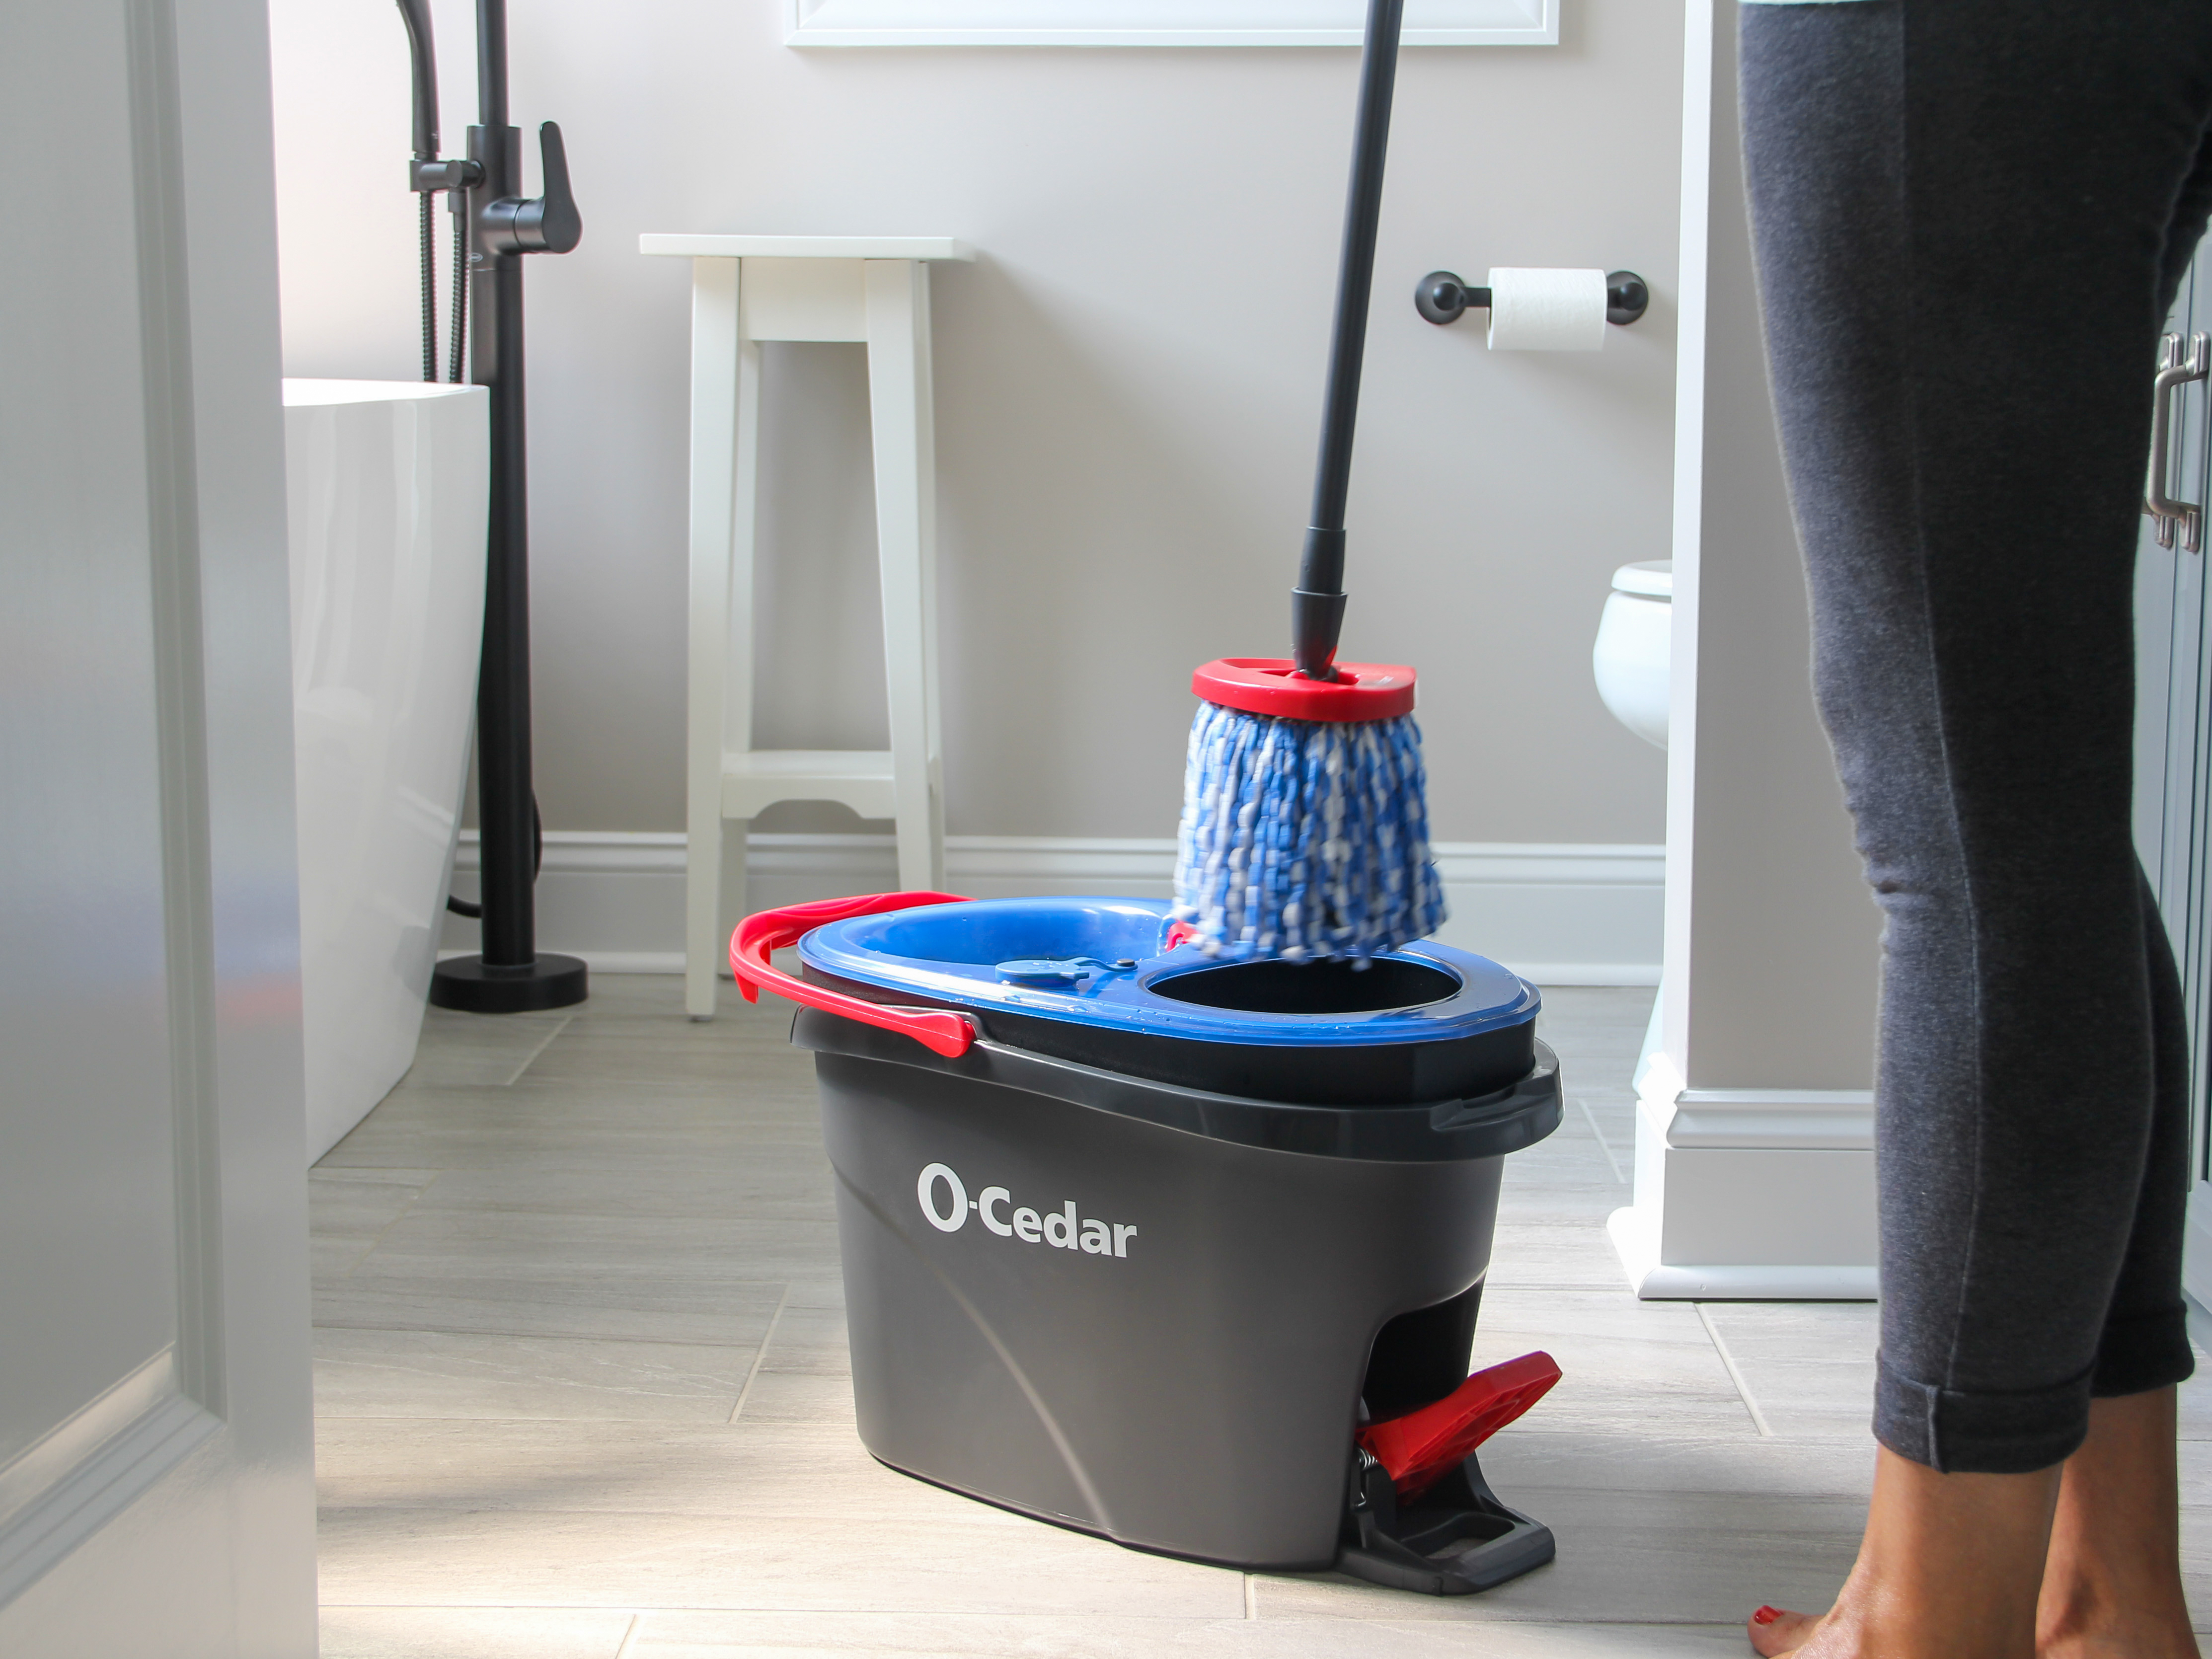 O-Cedar EasyWring RinseClean Spin Mop and Bucket System, Hands-Free System - image 25 of 25